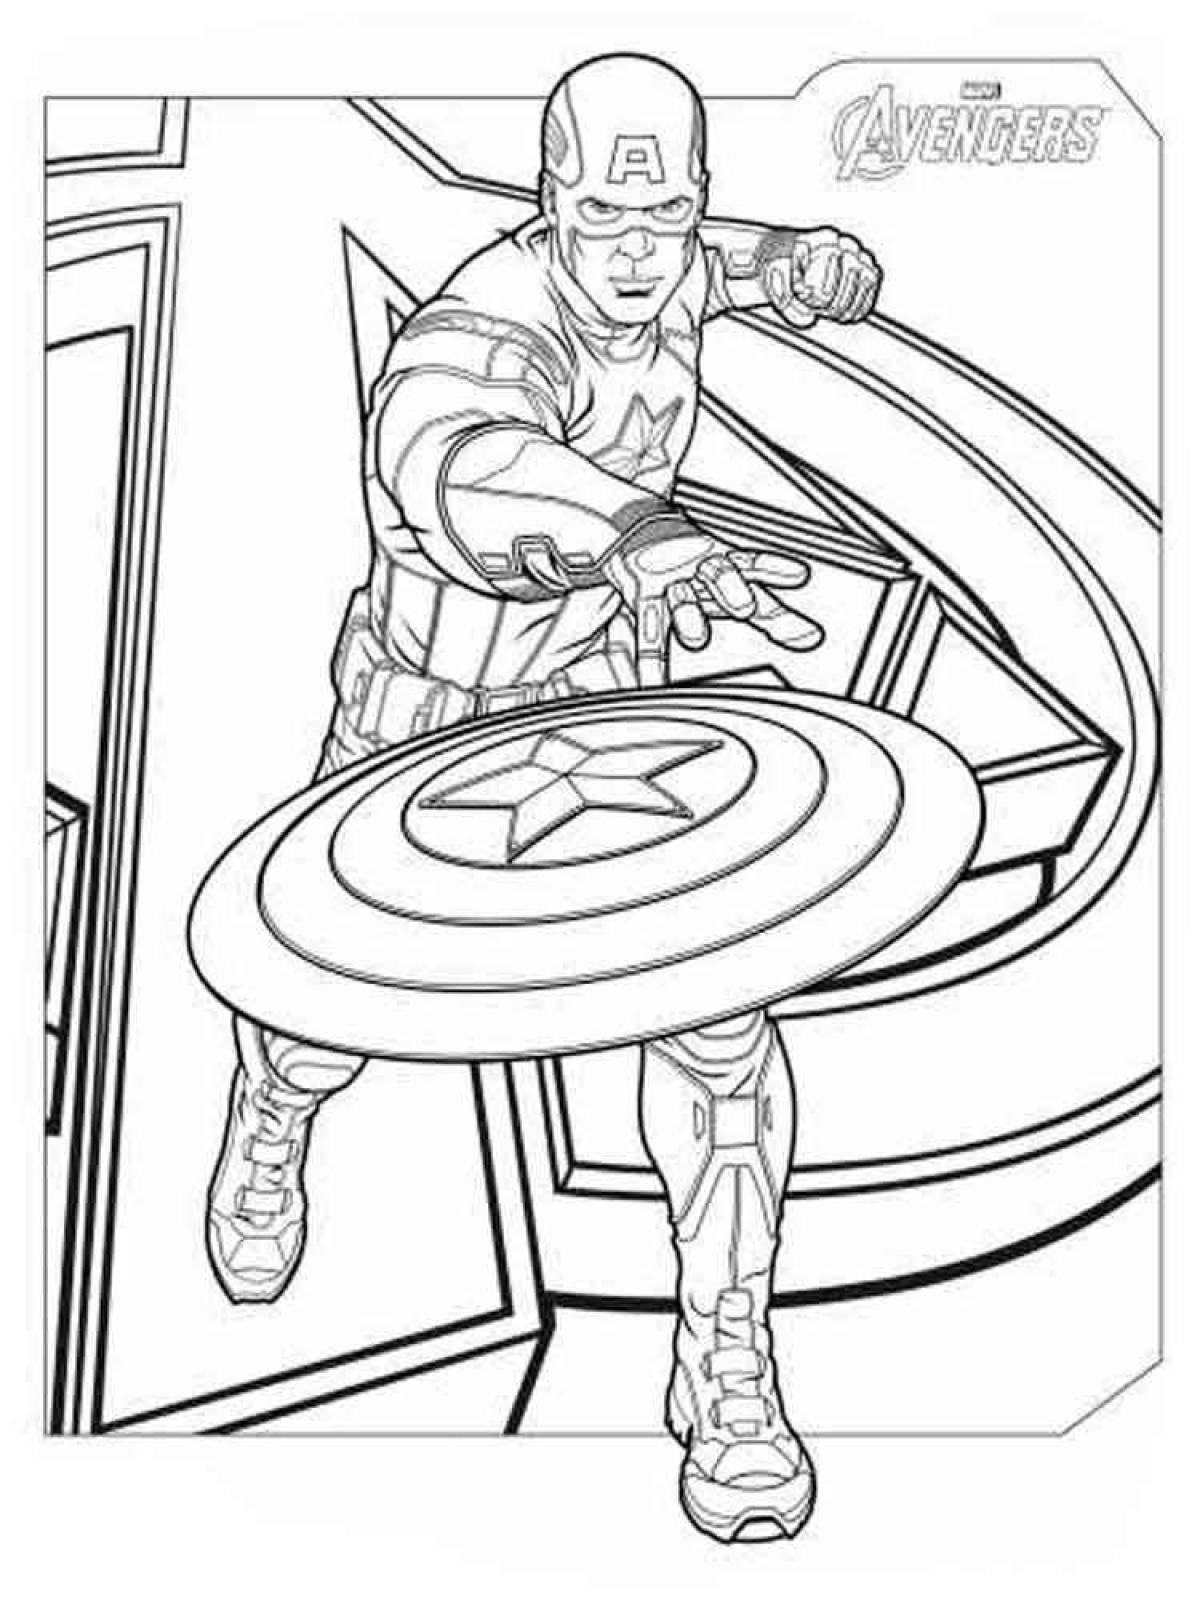 Captain Marvel shining coloring page